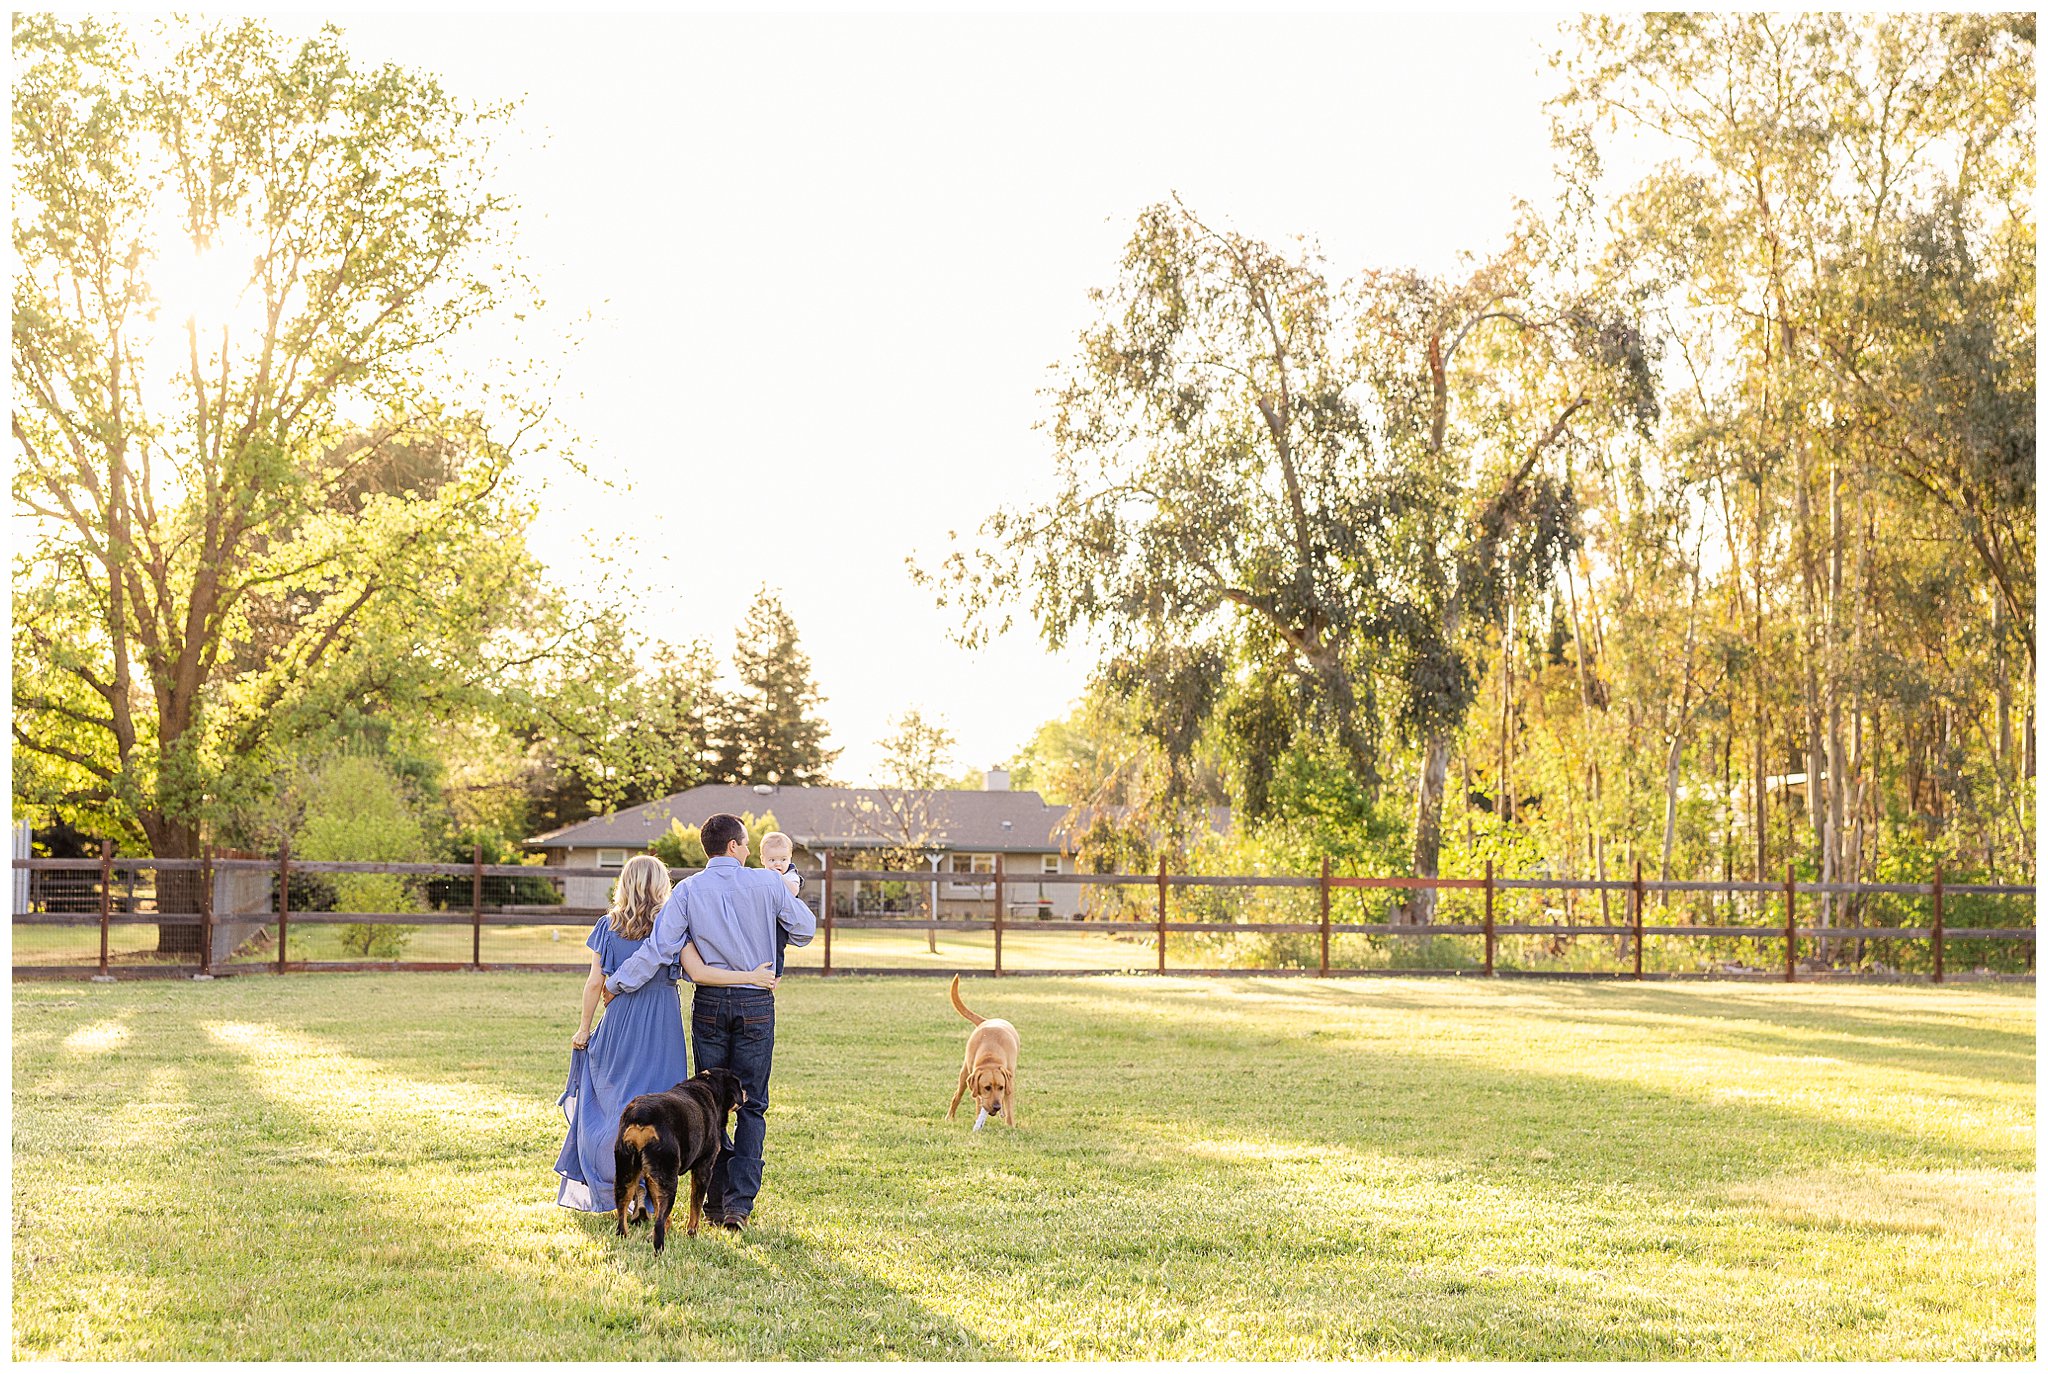 Backyard Family Session with Dogs Yellow Lab Rottweiler Green Grass Ranch Spring March,